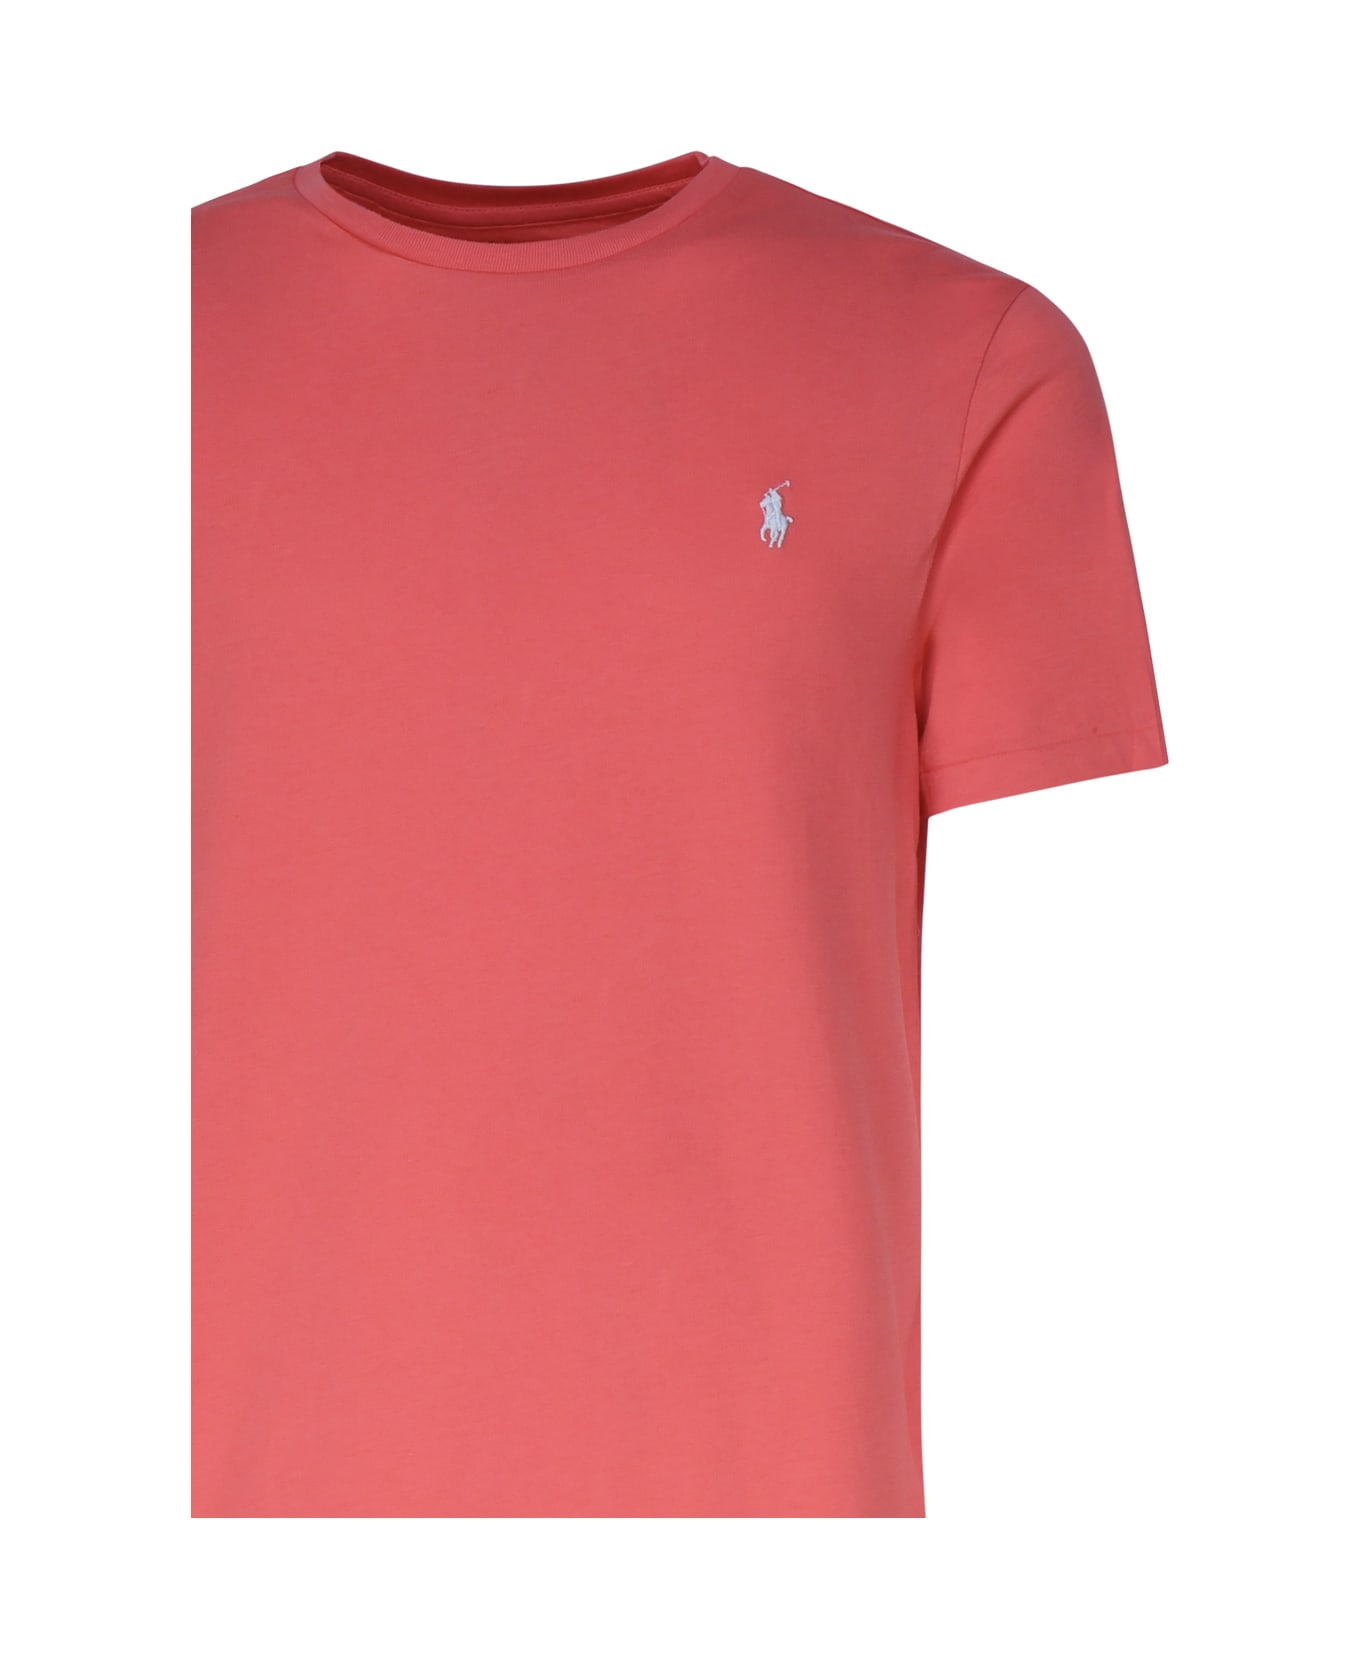 Polo Ralph Lauren Polo Pony T-shirt - Red